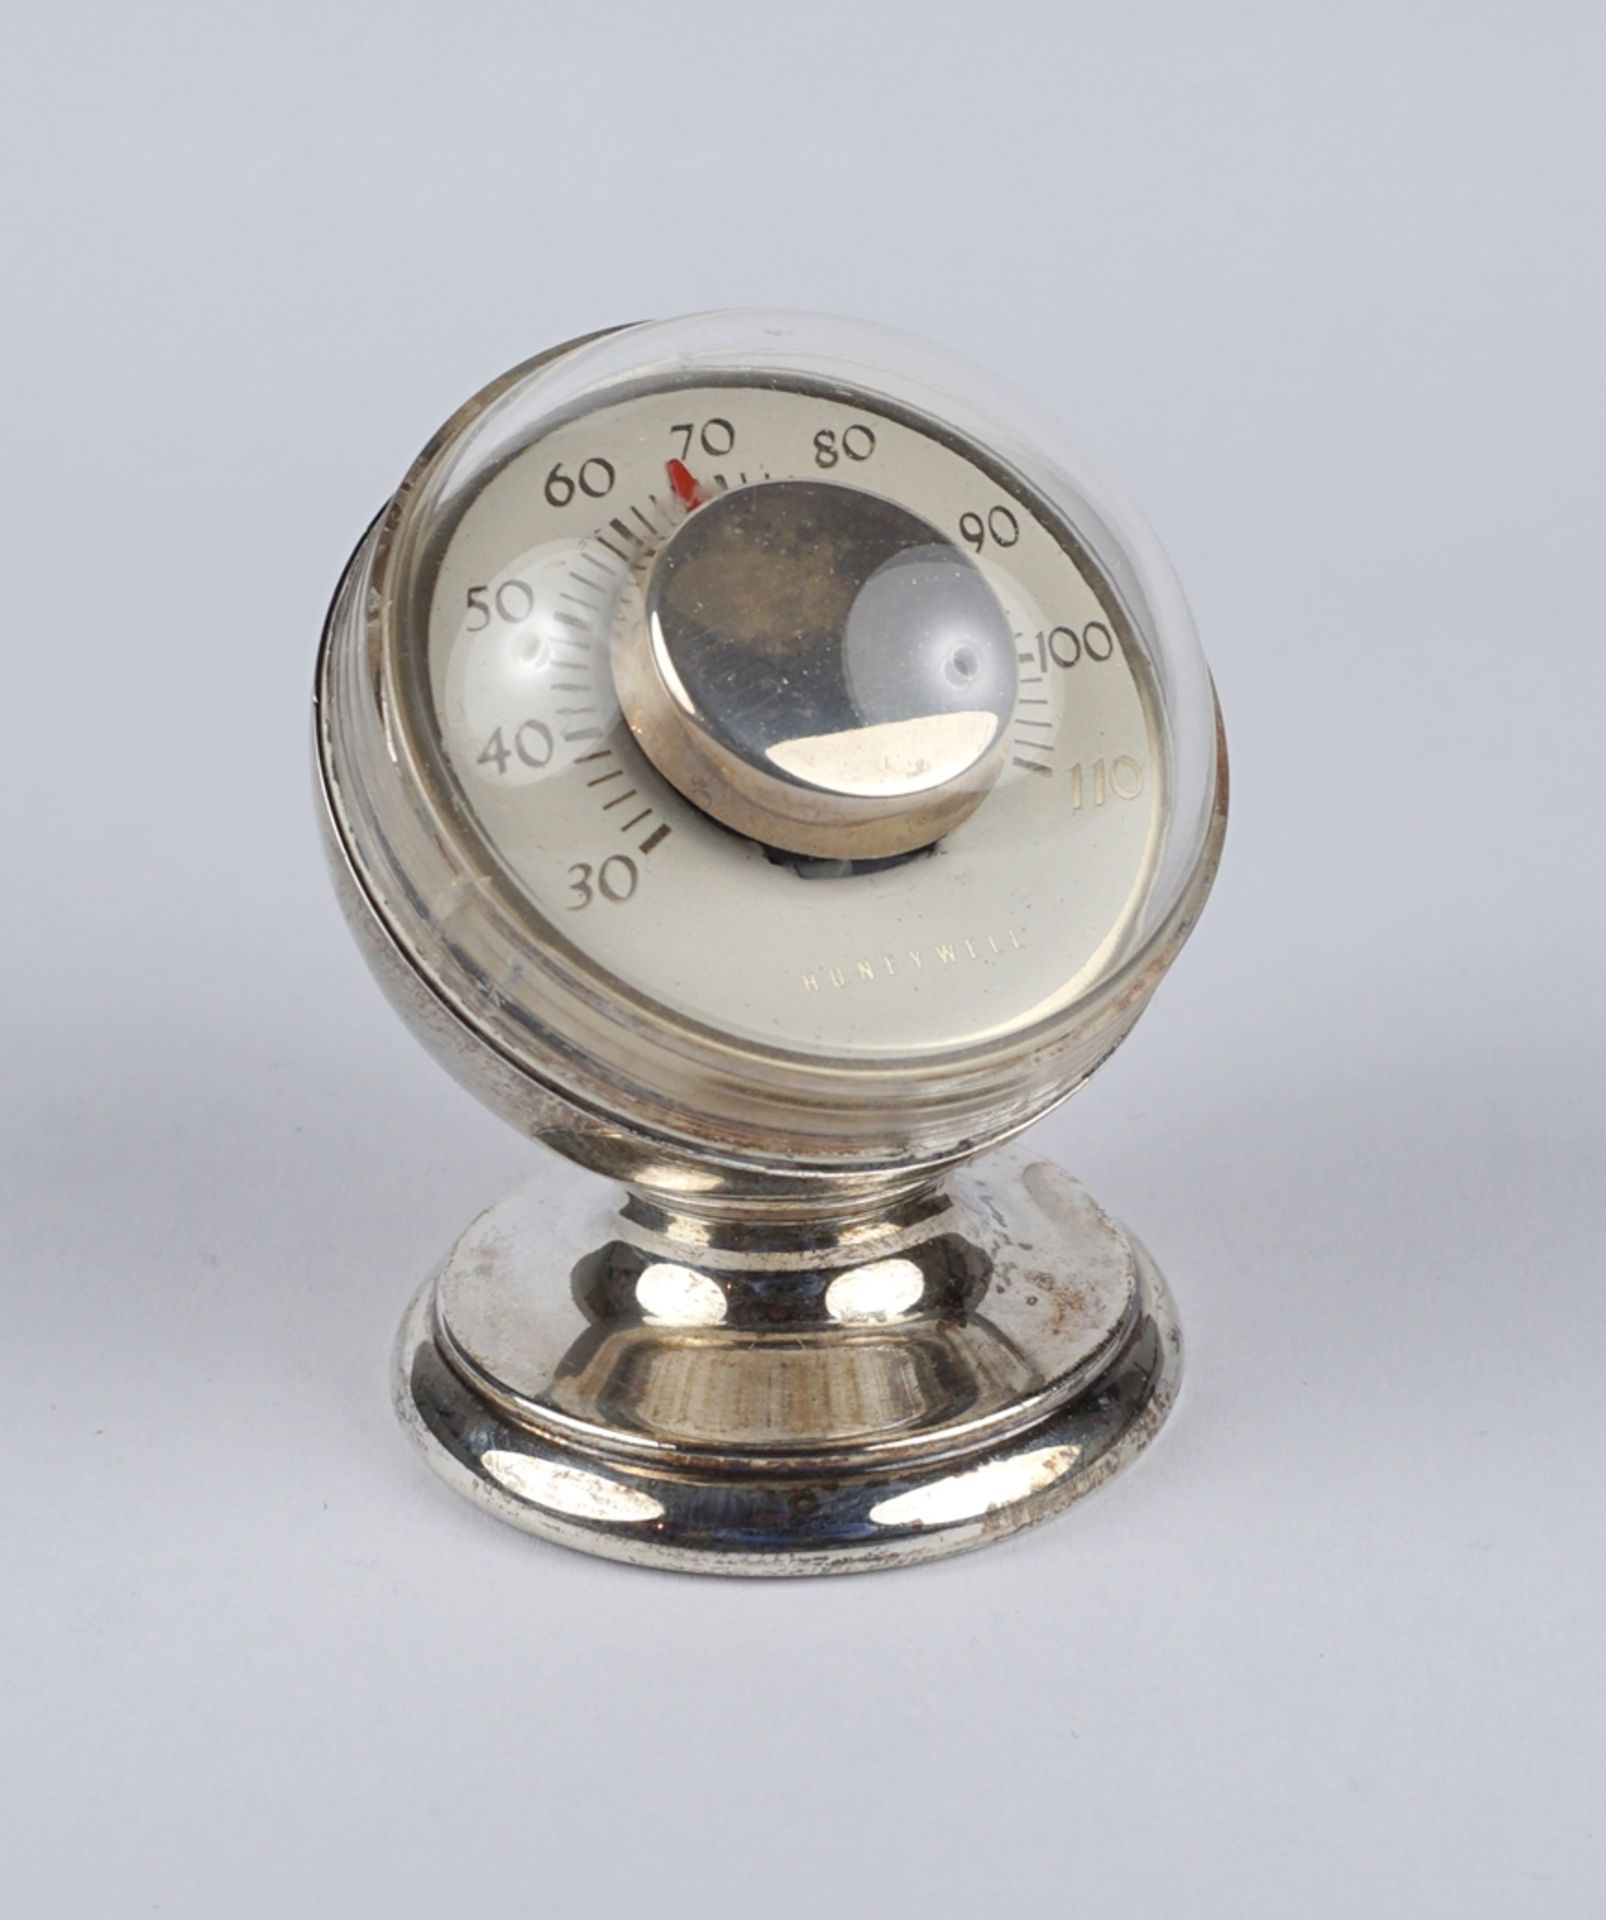 Honeywell table thermometer, Tiffany & Co, 925 sterling silver, 1960s